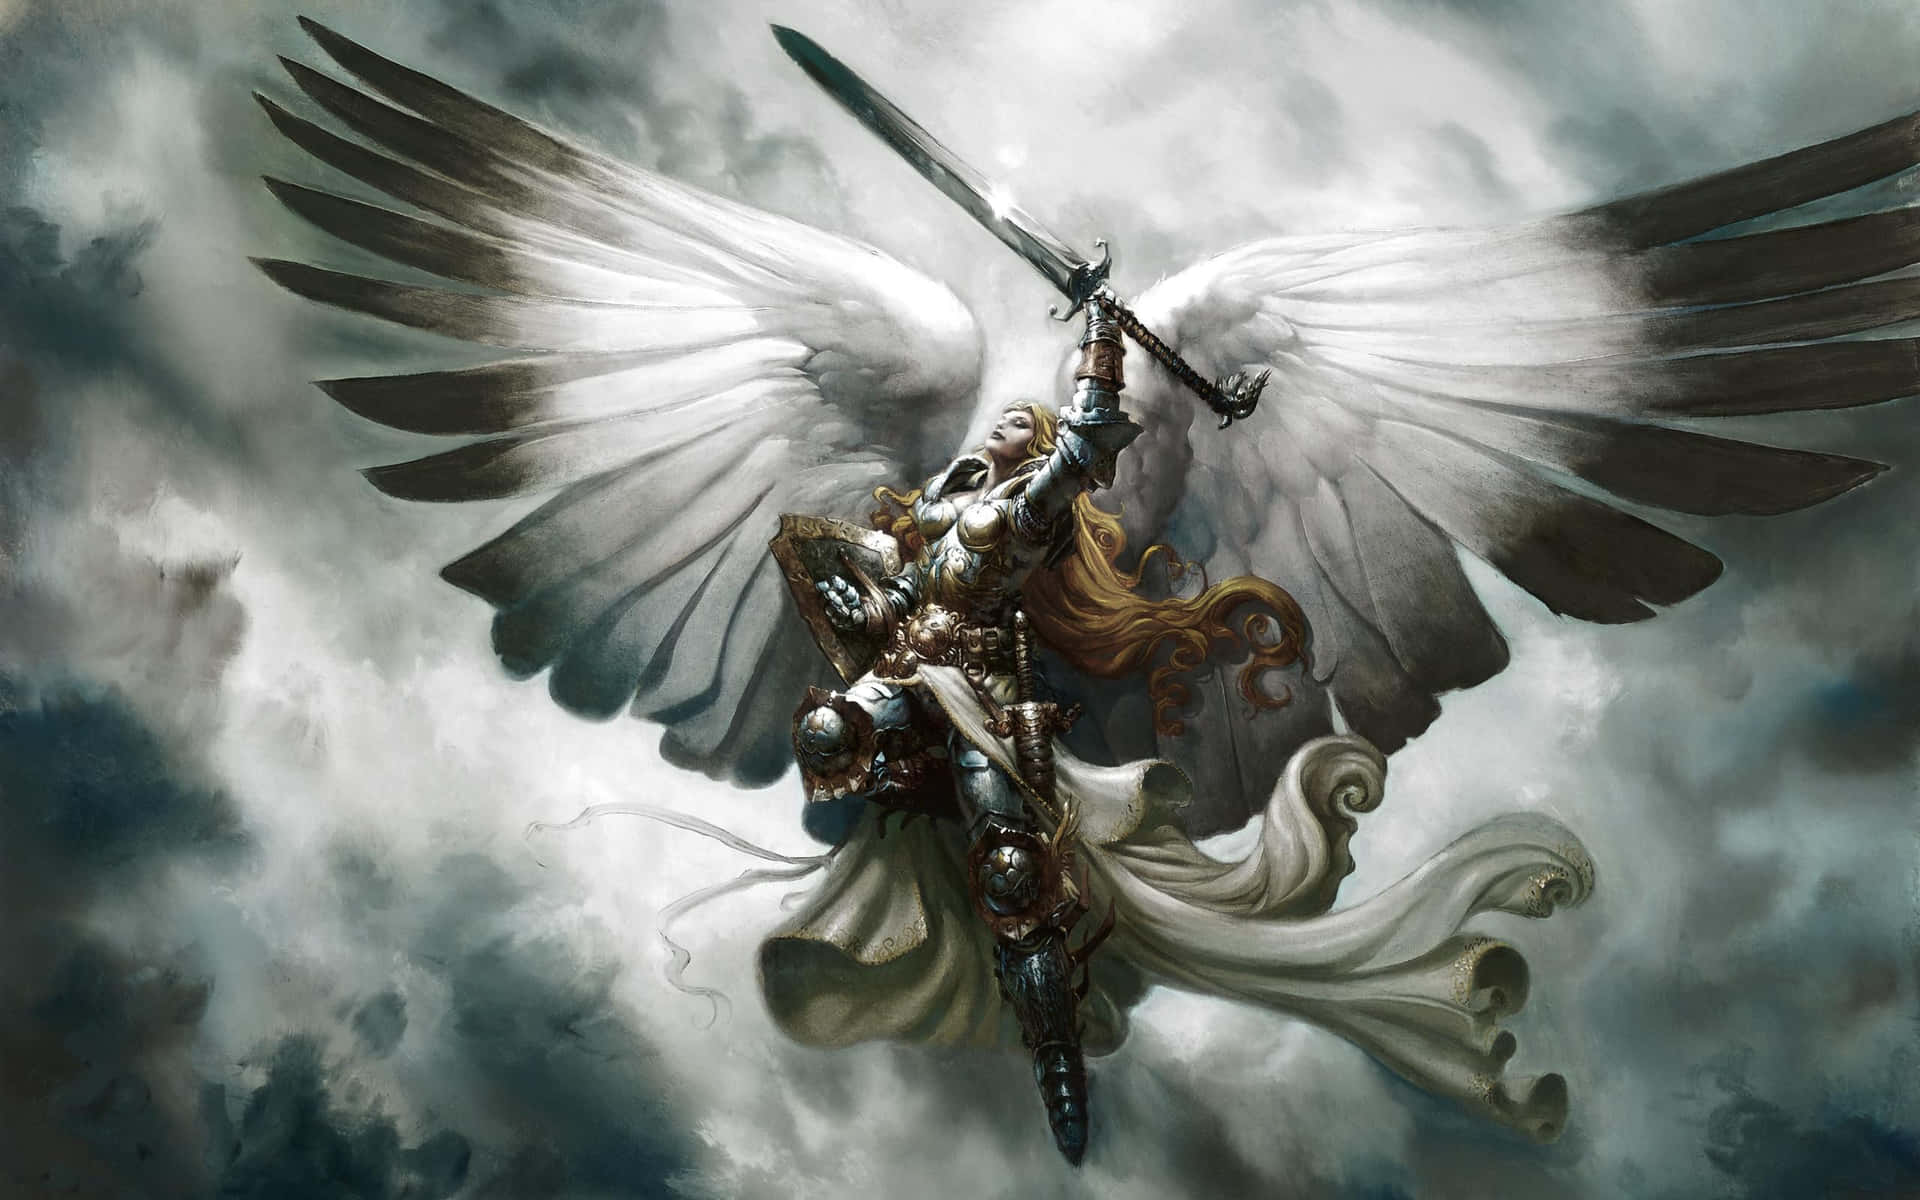 Revered Saint Michael Protection From Above